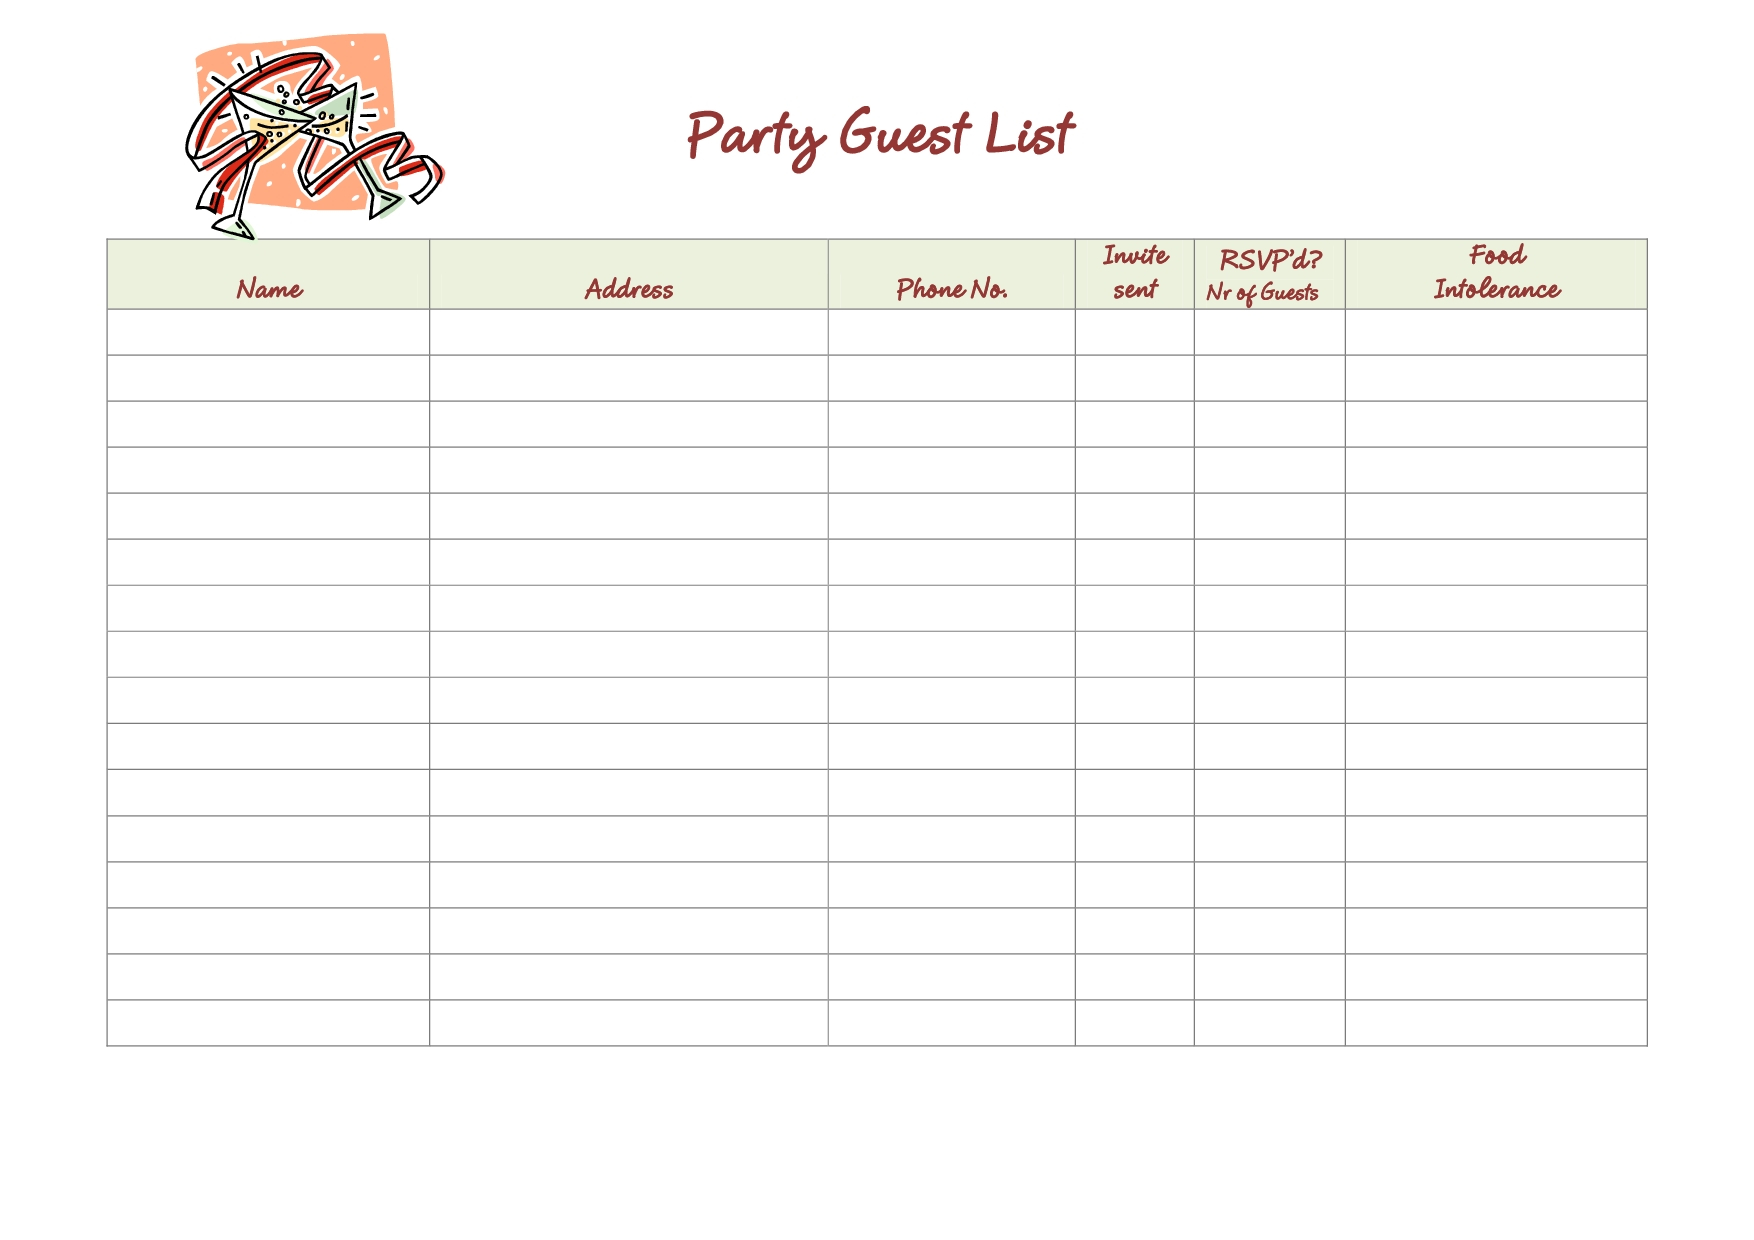 Party Rsvp List Template Unique Birthday Party Ideas And Themes